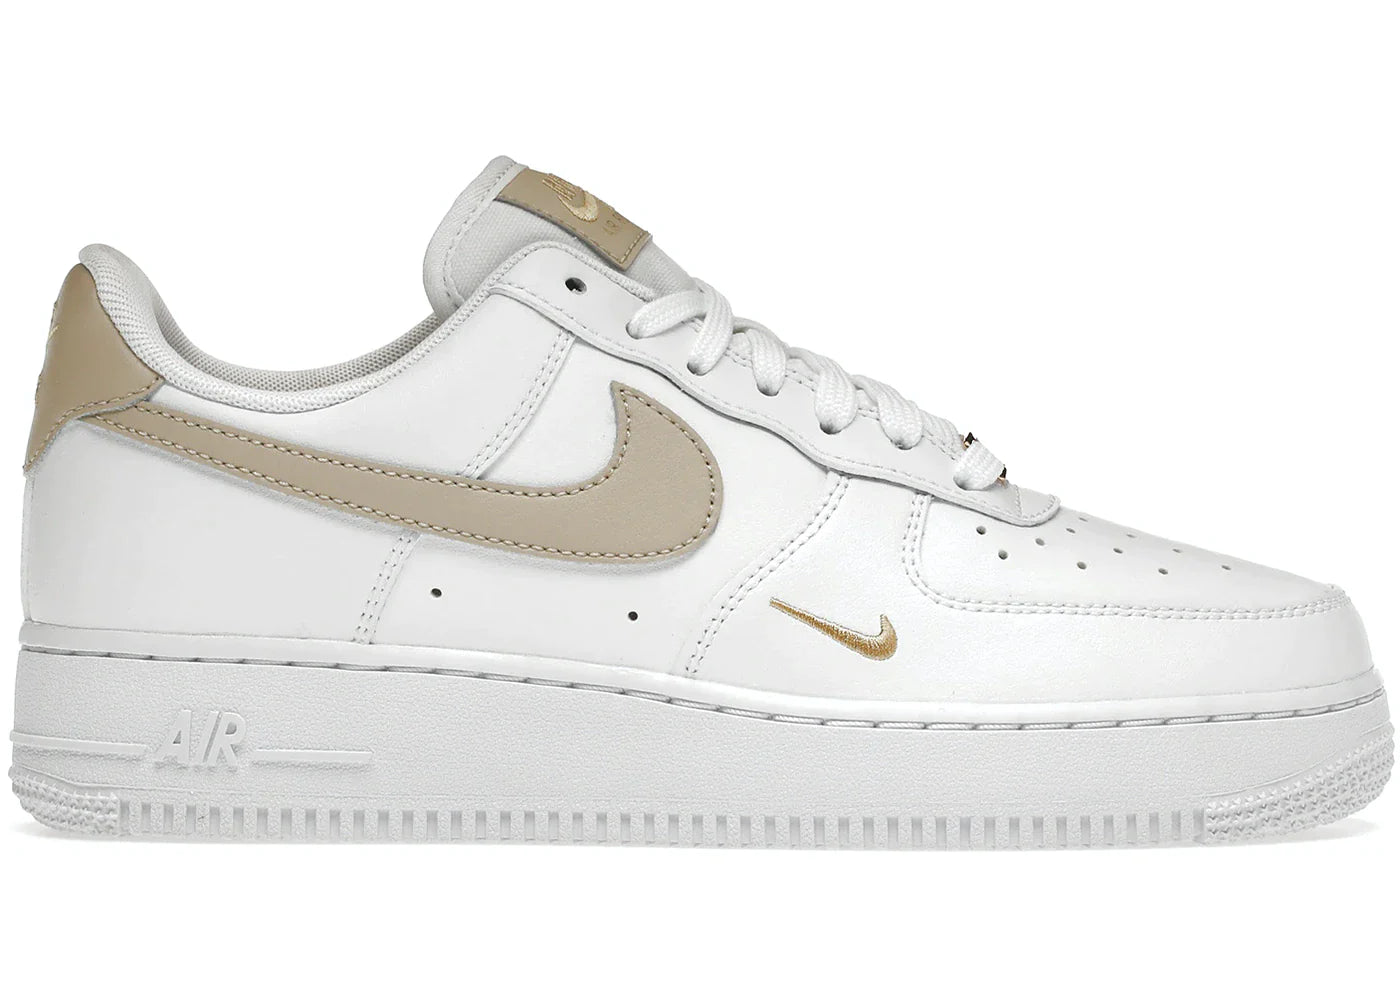 Naked
Nike Air Force 1 '07 Essential White/Rattan - WORLDOFSHOES